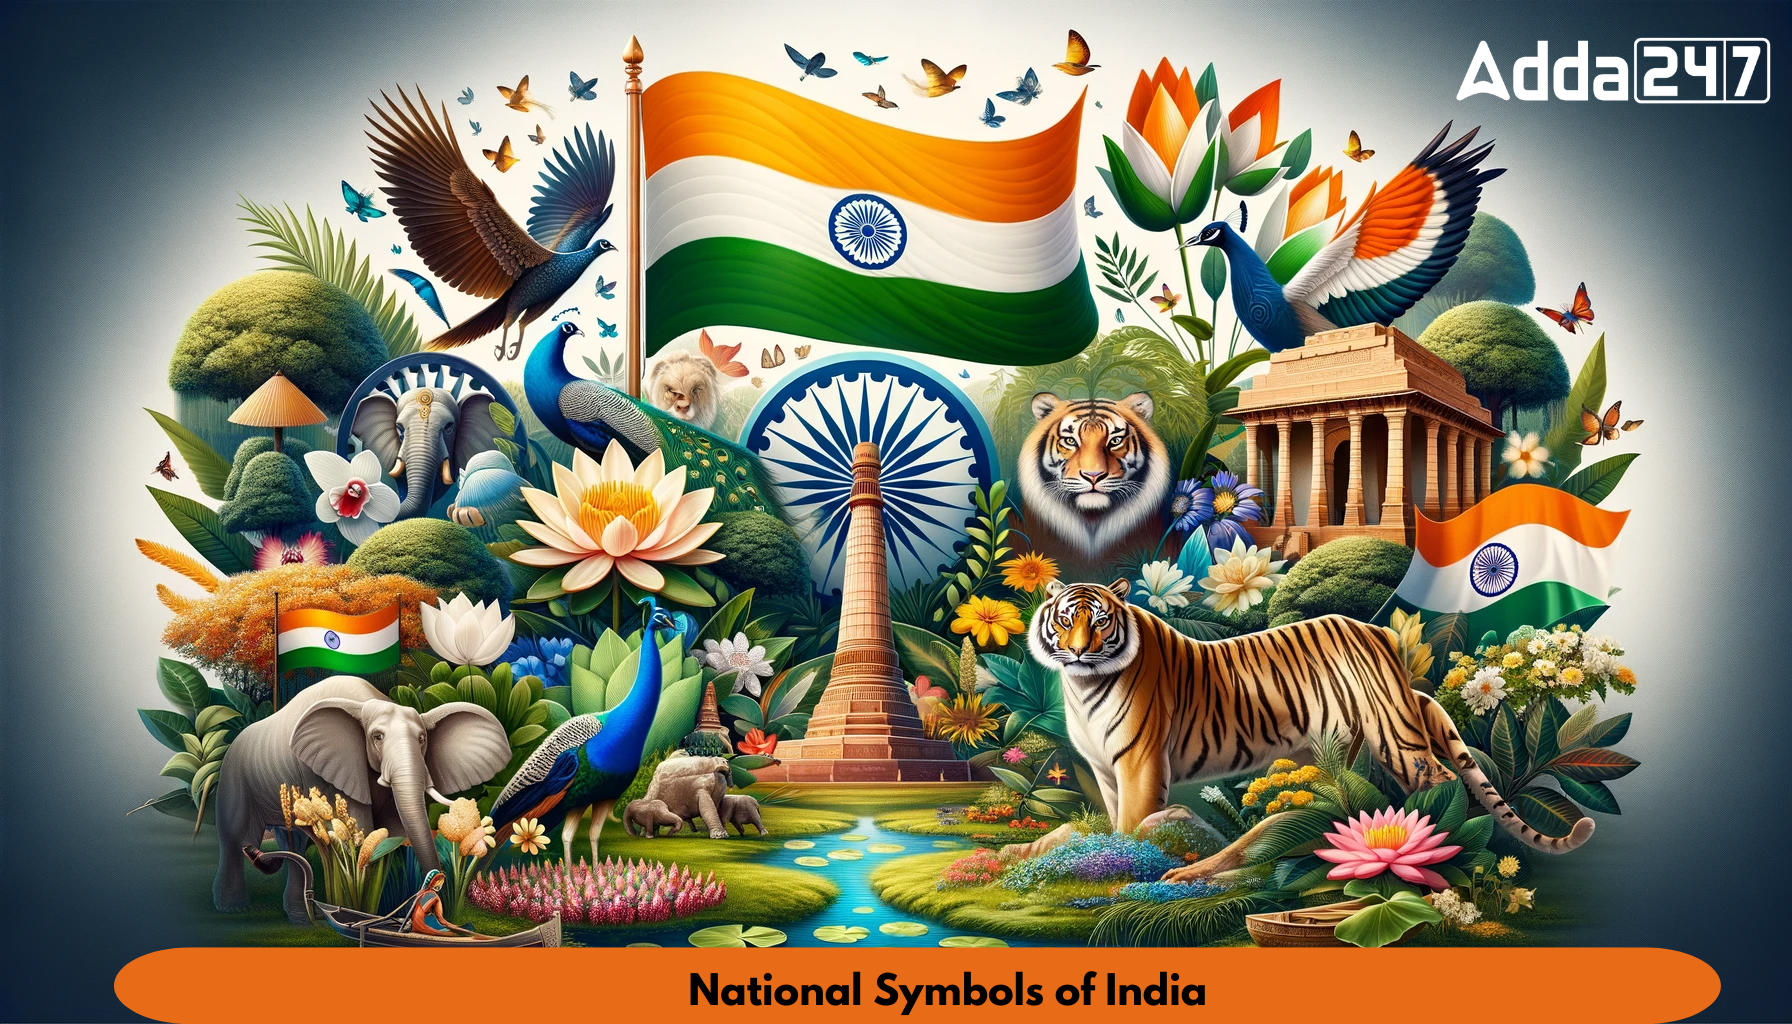 Baybee Wooden National Symbols with Pictures Knob & Peg Puzzle 8 Pieces  Online India, Buy Puzzle Games & Toys for (2-6Years) at FirstCry.com -  9306849